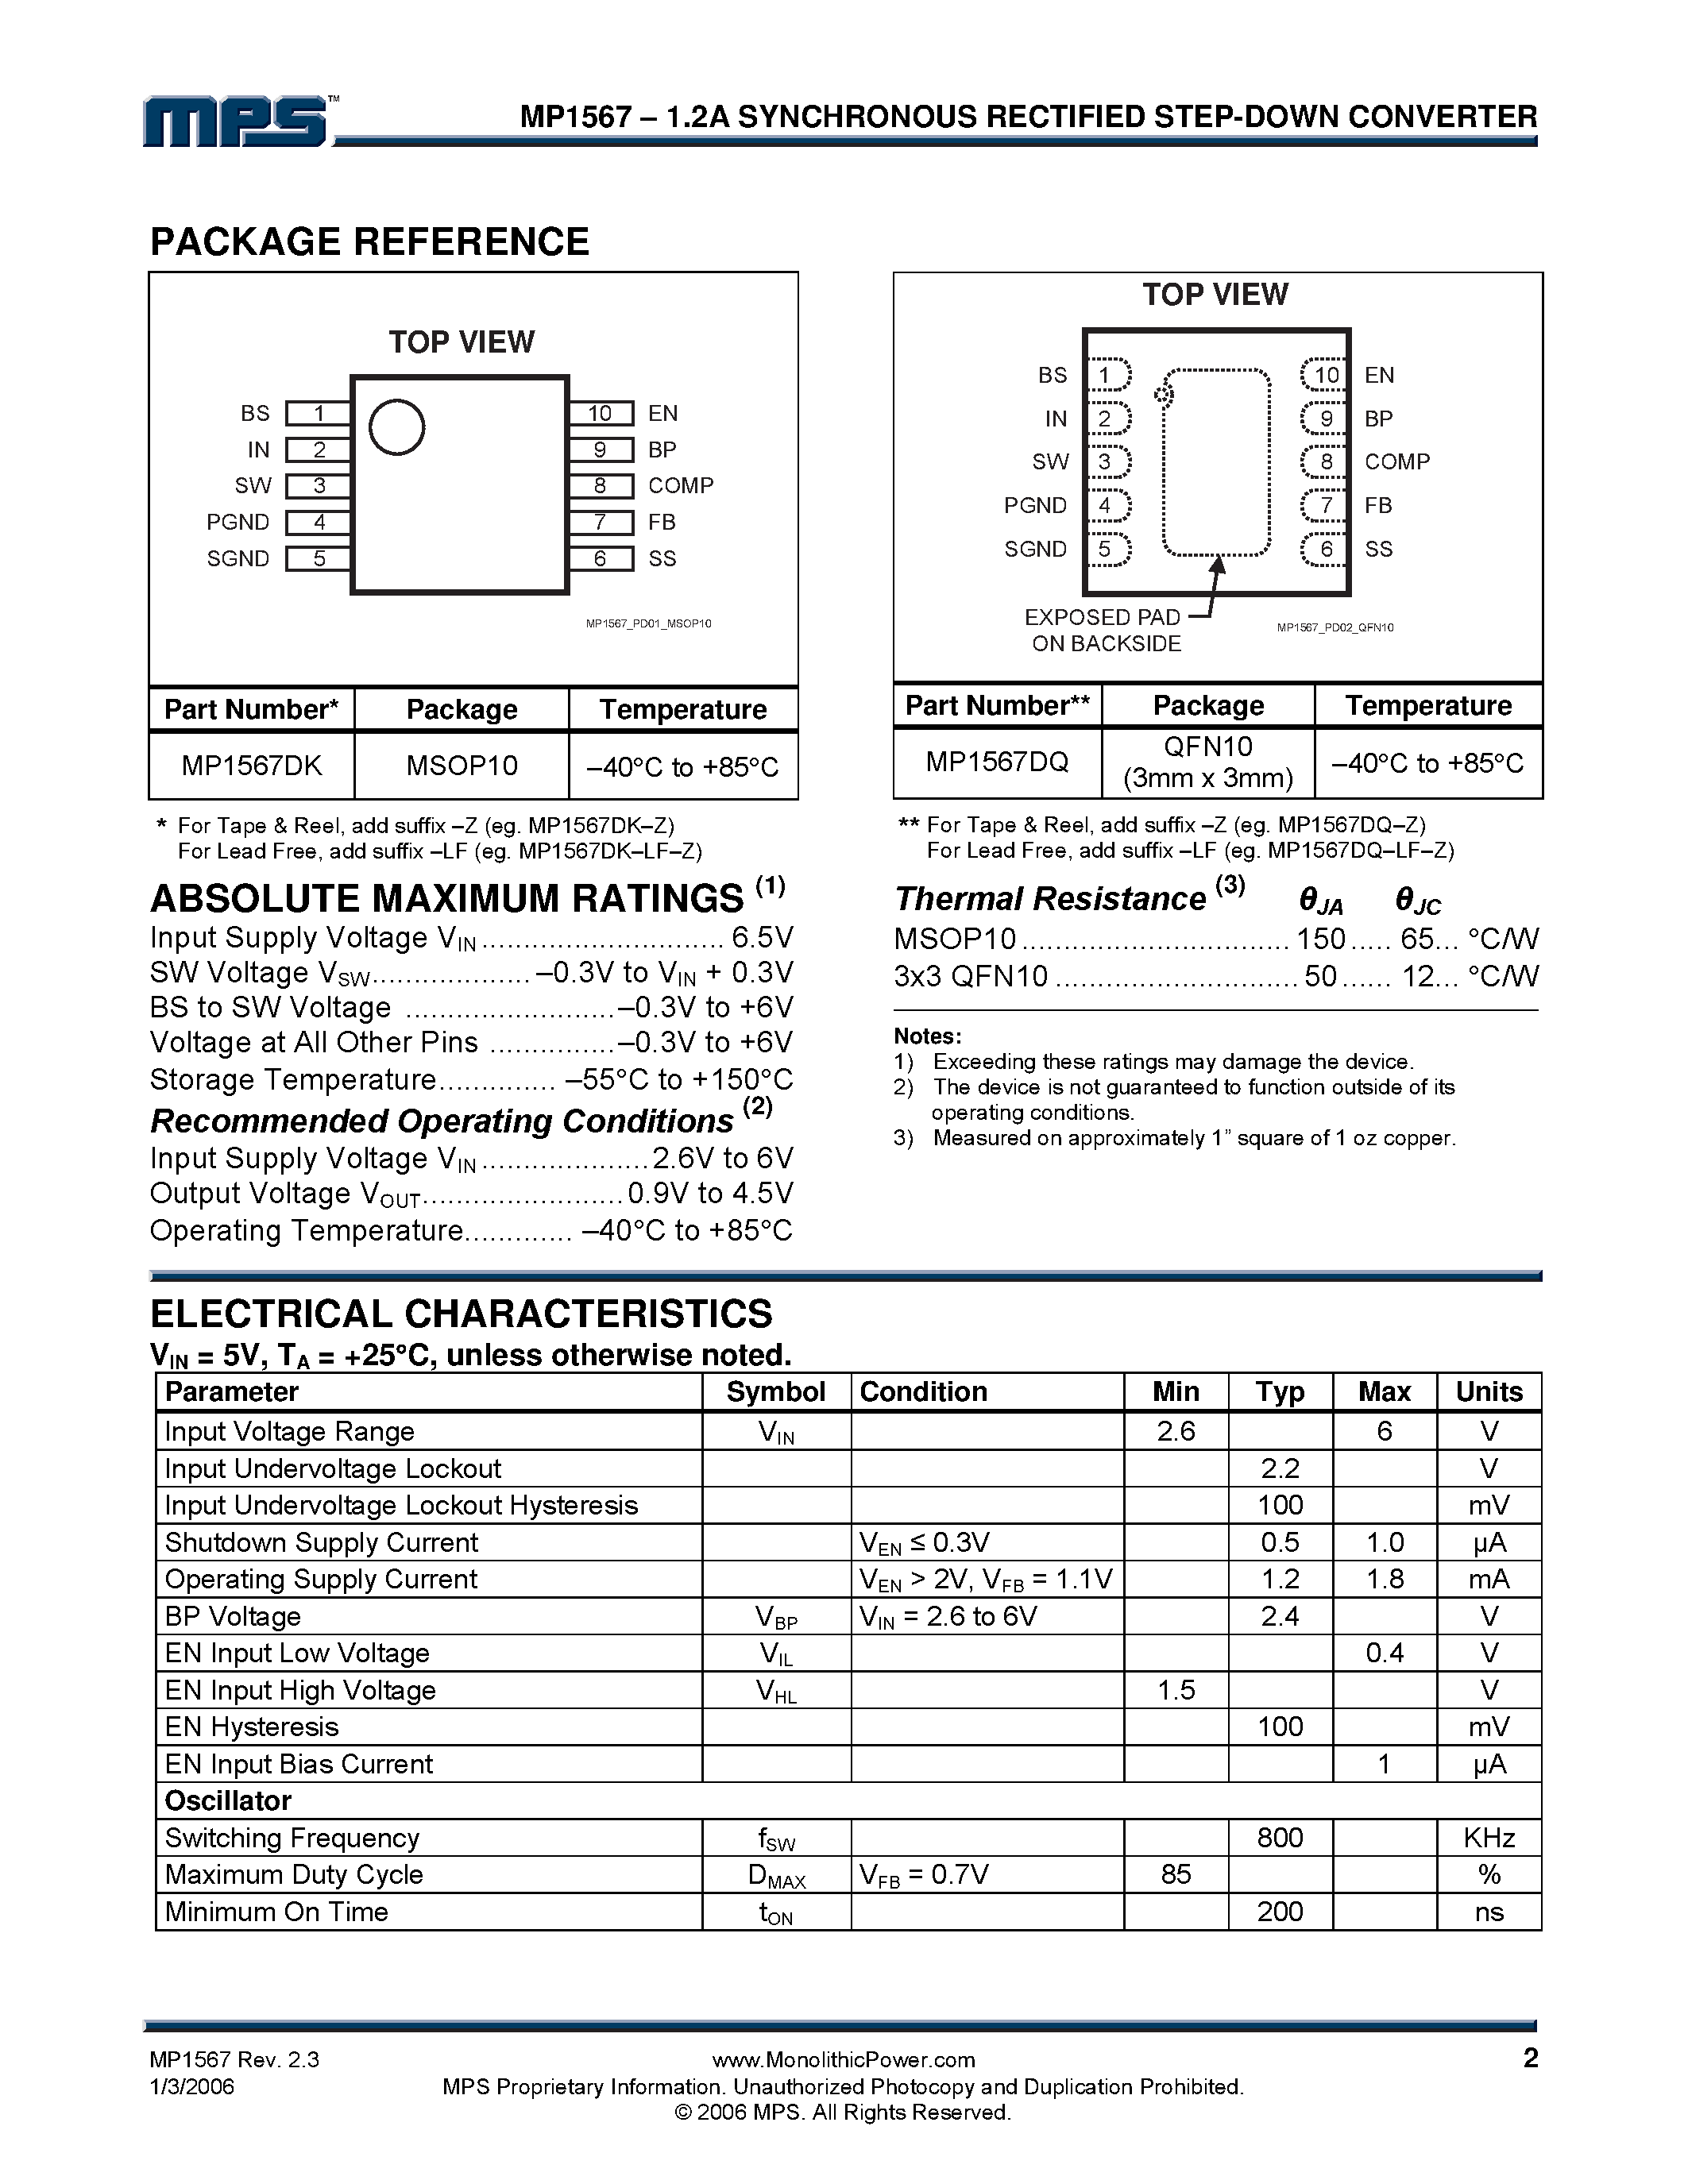 Datasheet MP1567 - 1.2A Synchronous Rectified Step-Down Converter page 2